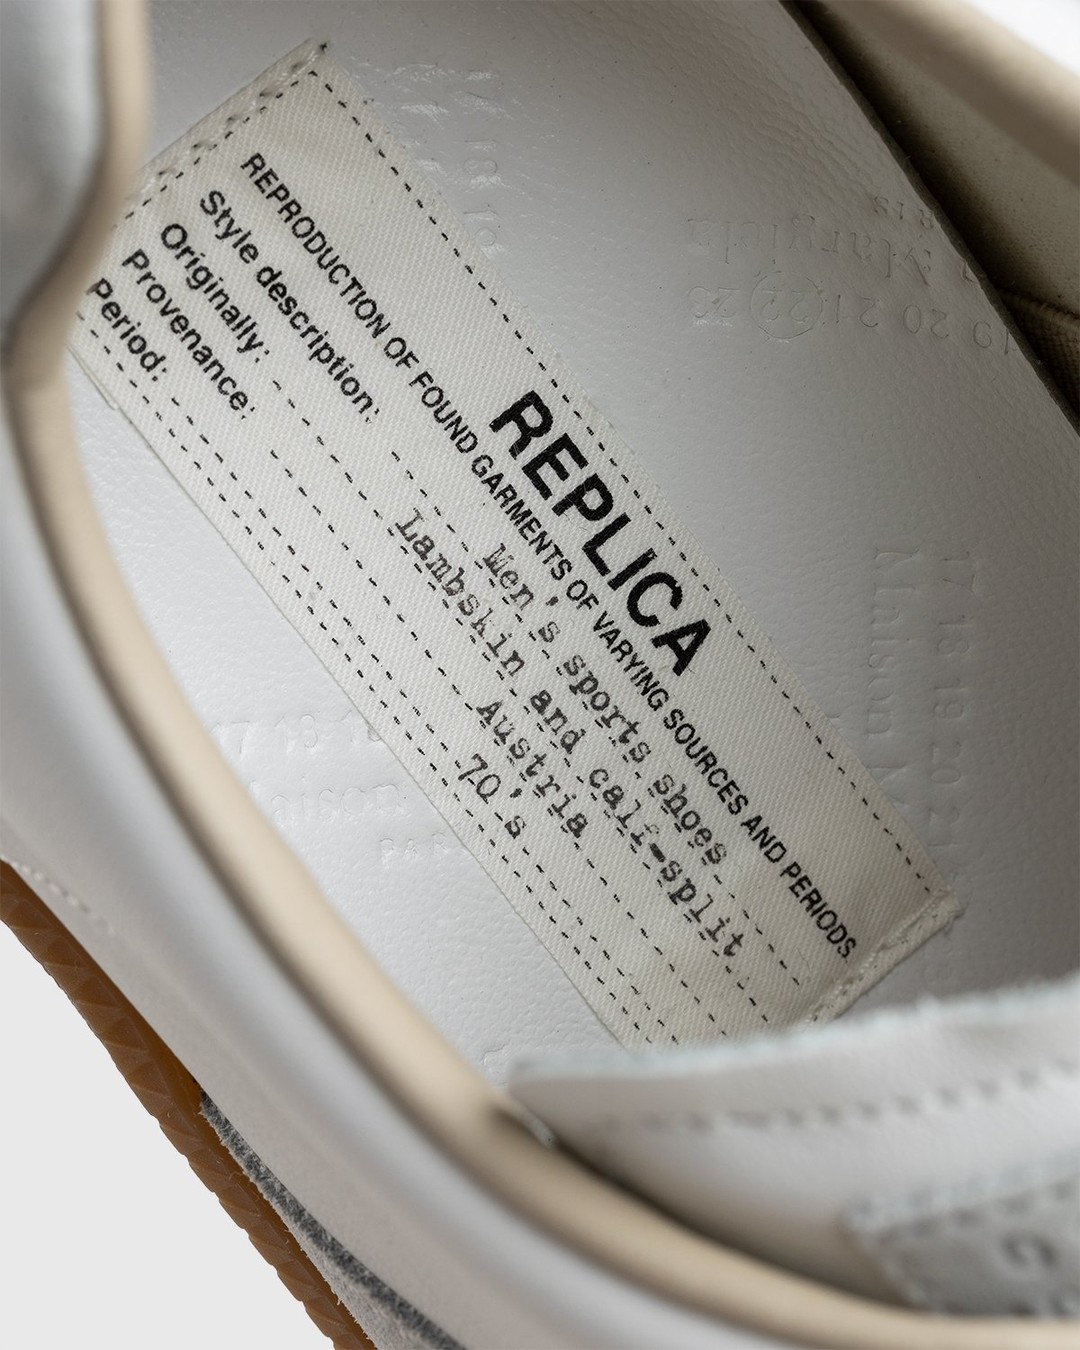 Maison Margiela – Replica Paint Drop Sneakers White - Low Top Sneakers - White - Image 4